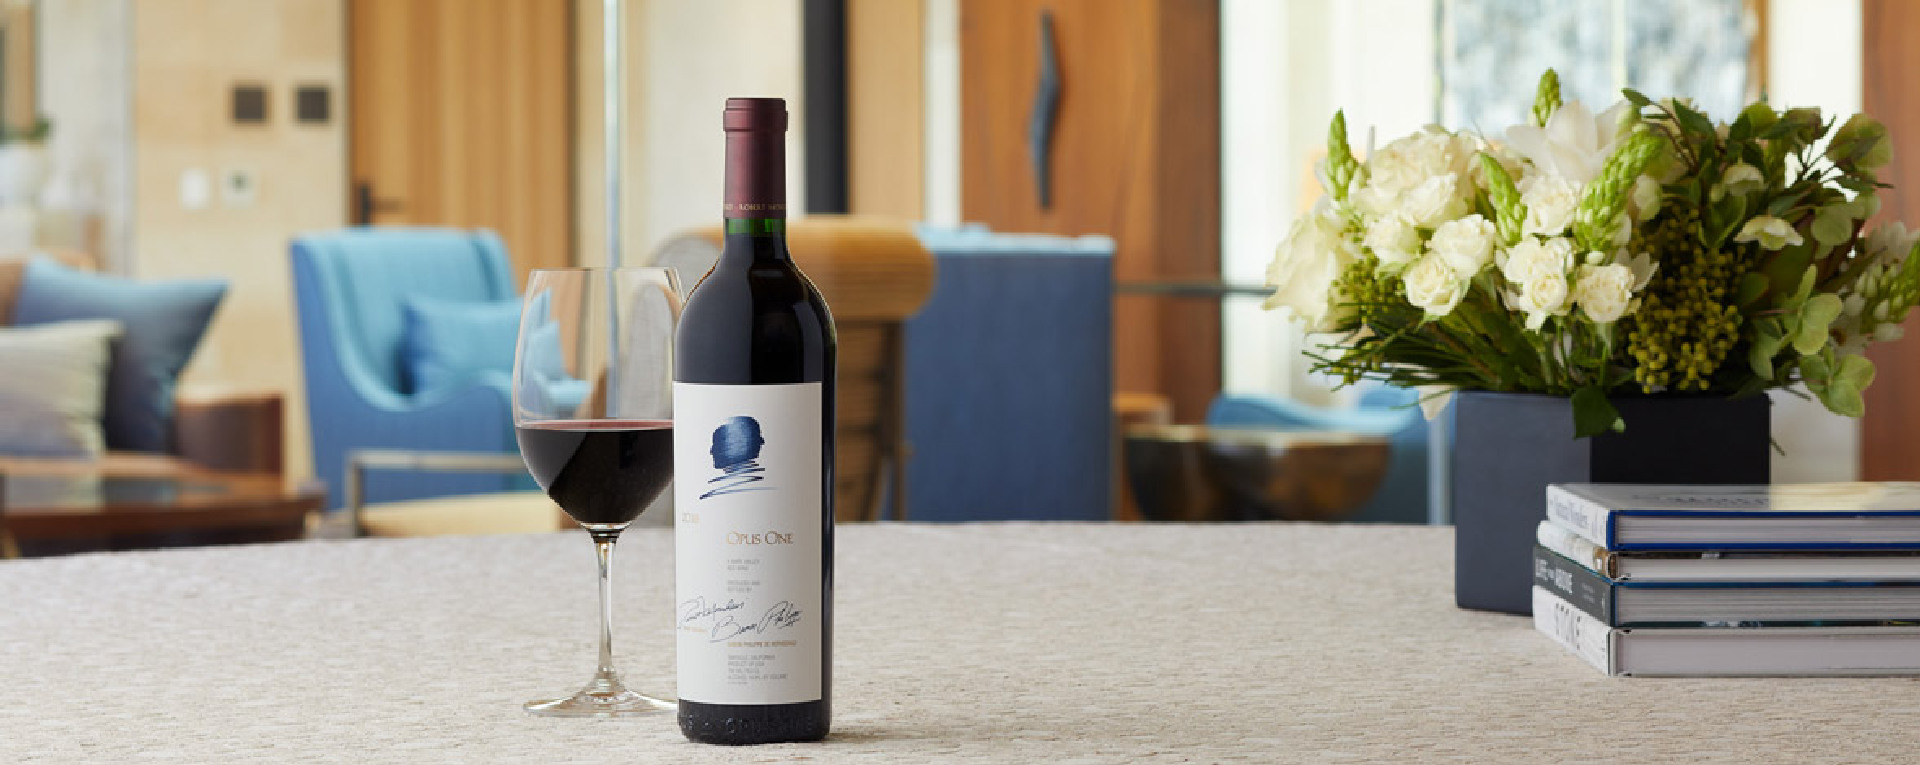 The Opus One 2018 offers profuse aromas of blackberry, cassis and black cherry. Elegant notes of violets, white pepper and rose petals follow 